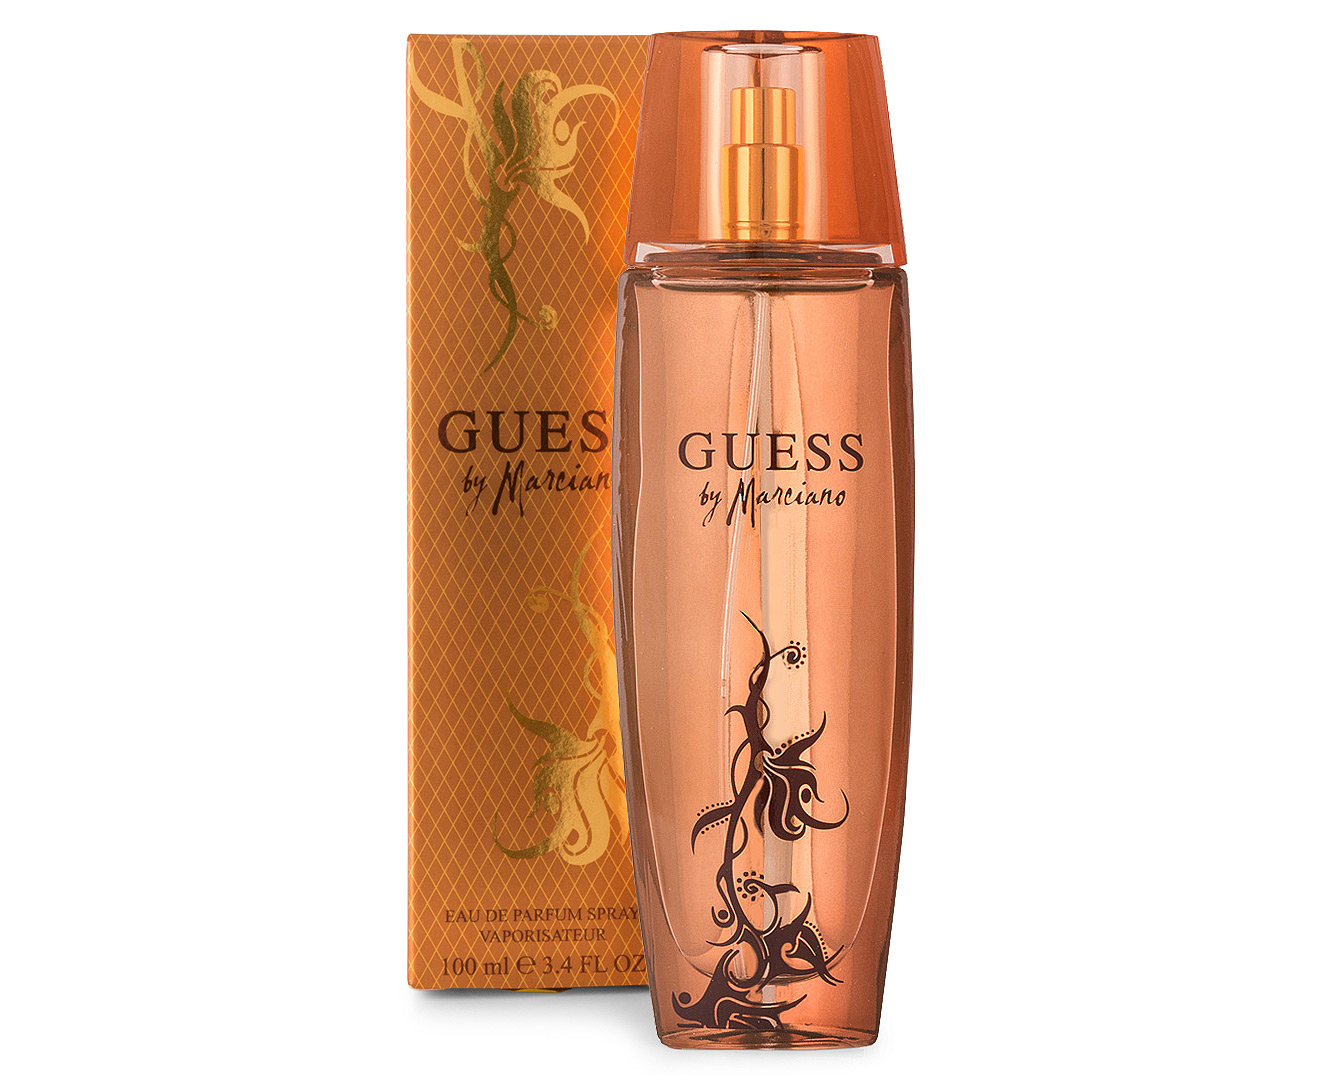 Guess by Marciano for Women EDP 100mL